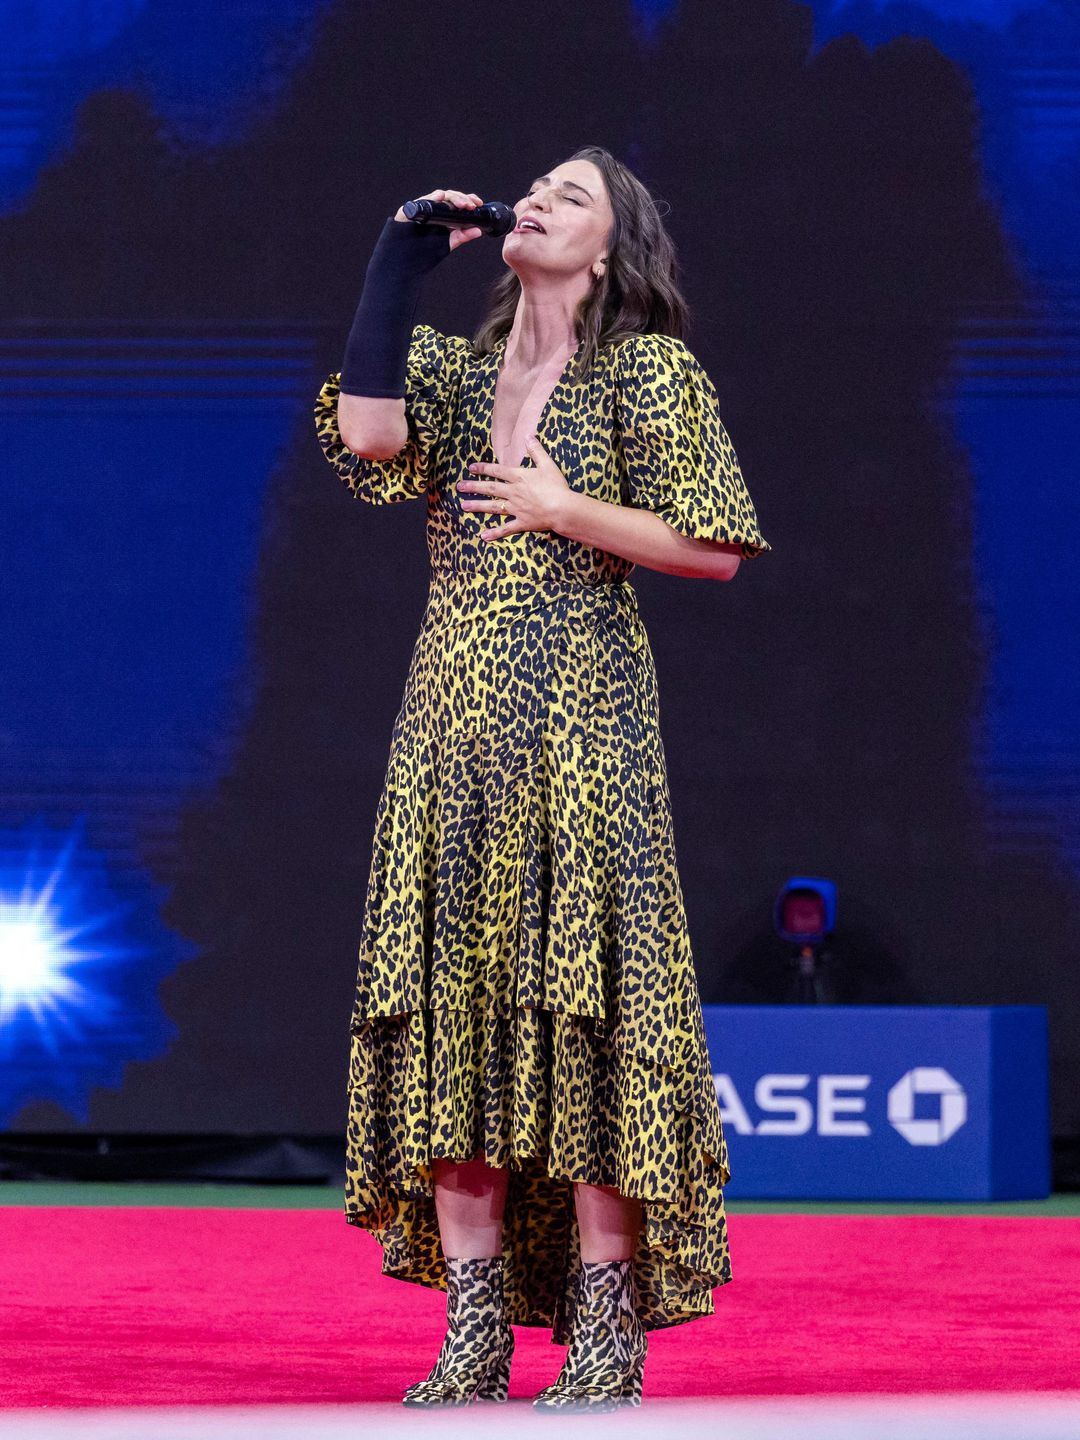 Singer Sara Bareilles performing in leopard print dress at the US Open 